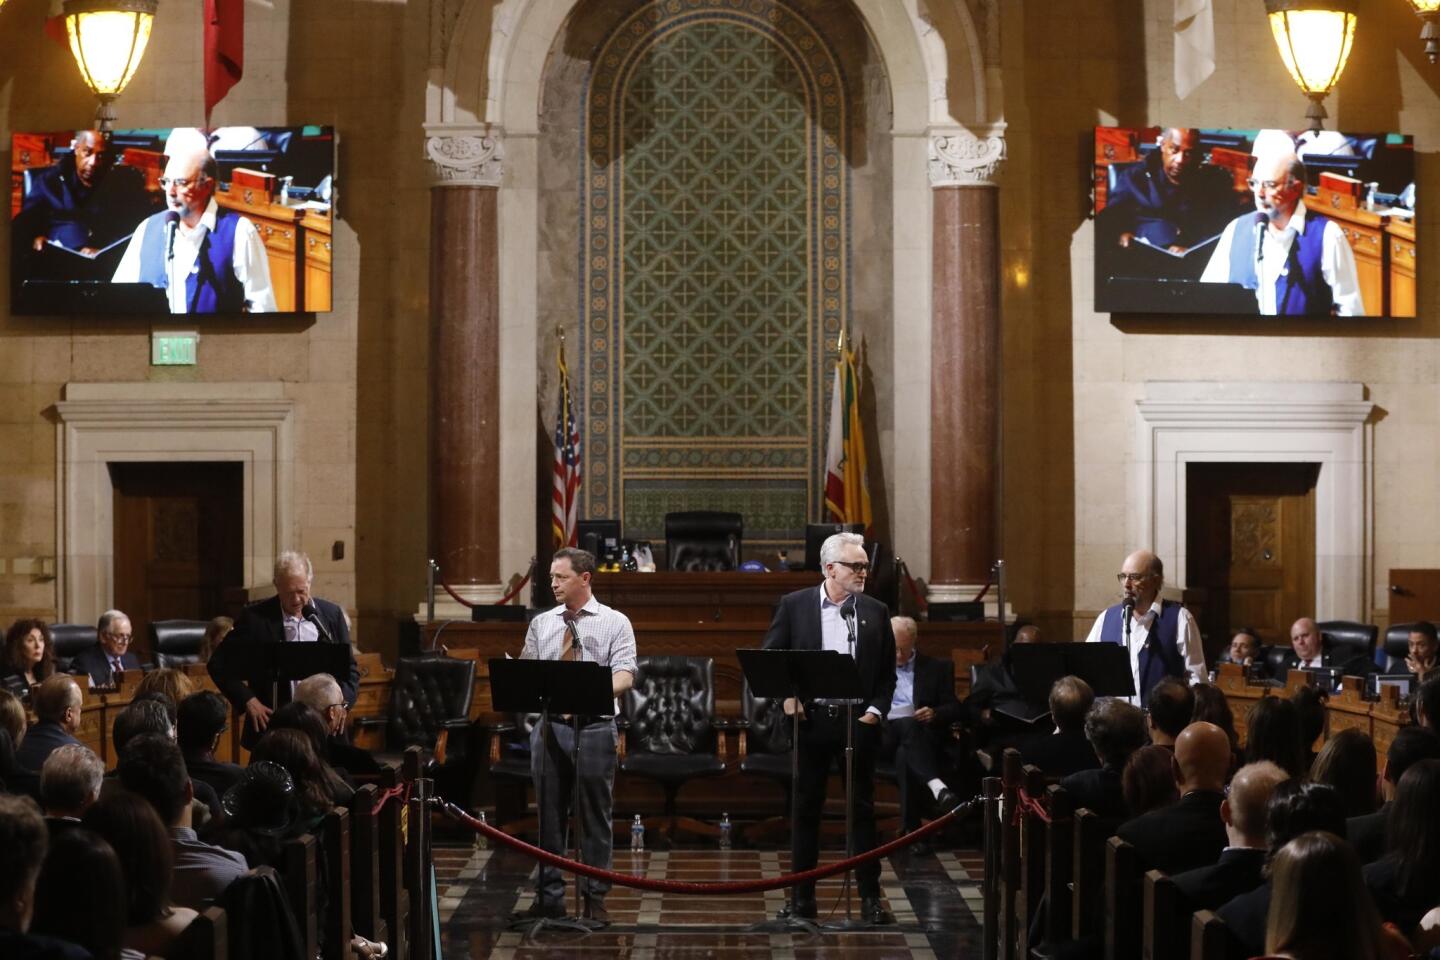 Actors Jeff Perry, left, Joshua Malina, Bradley Whitford and Richard Schiff perform in the Fountain Theatre's production of a one-night-only reading of the screenplay to "All the President's Men" in City Council Chambers in City Hall in Los Angeles on Jan. 27, 2018. The point was to celebrate a free press in an era when it's under attack by the White House. The Fountain's artistic director, Stephen Sachs, recruited an all-star cast that was essentially a "West Wing" reunion.